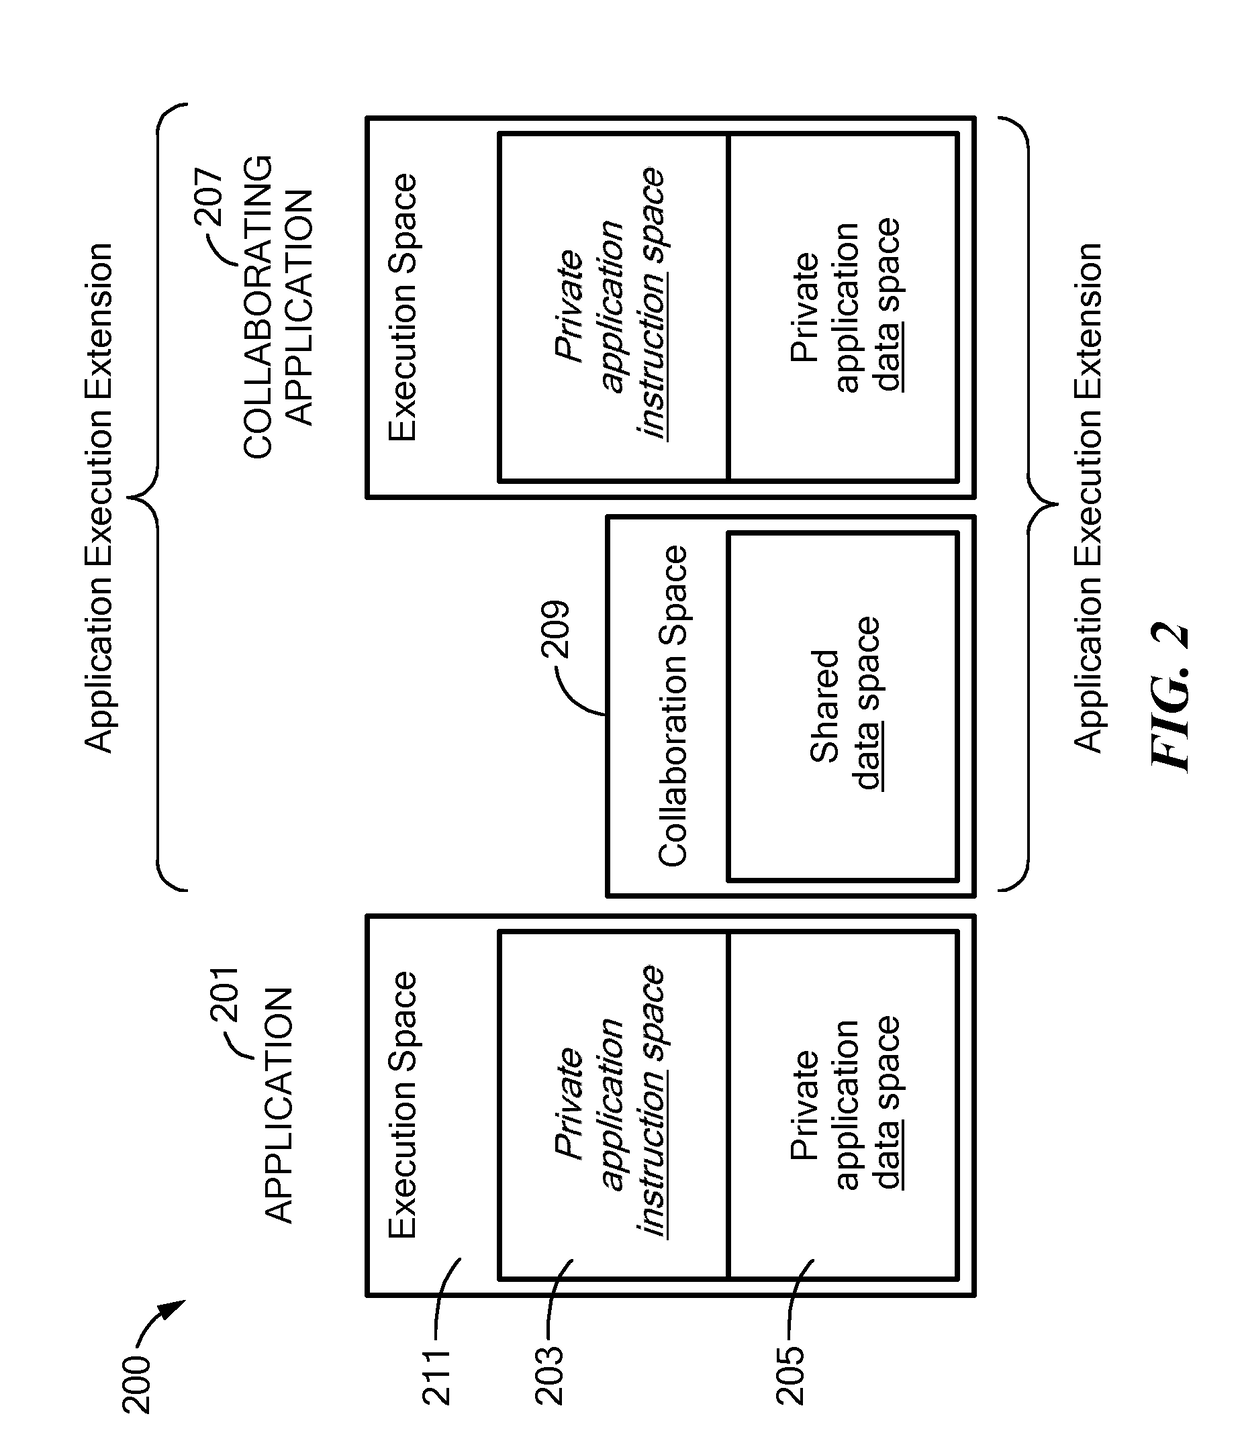 Method and Apparatus for Trusted Execution of Applications